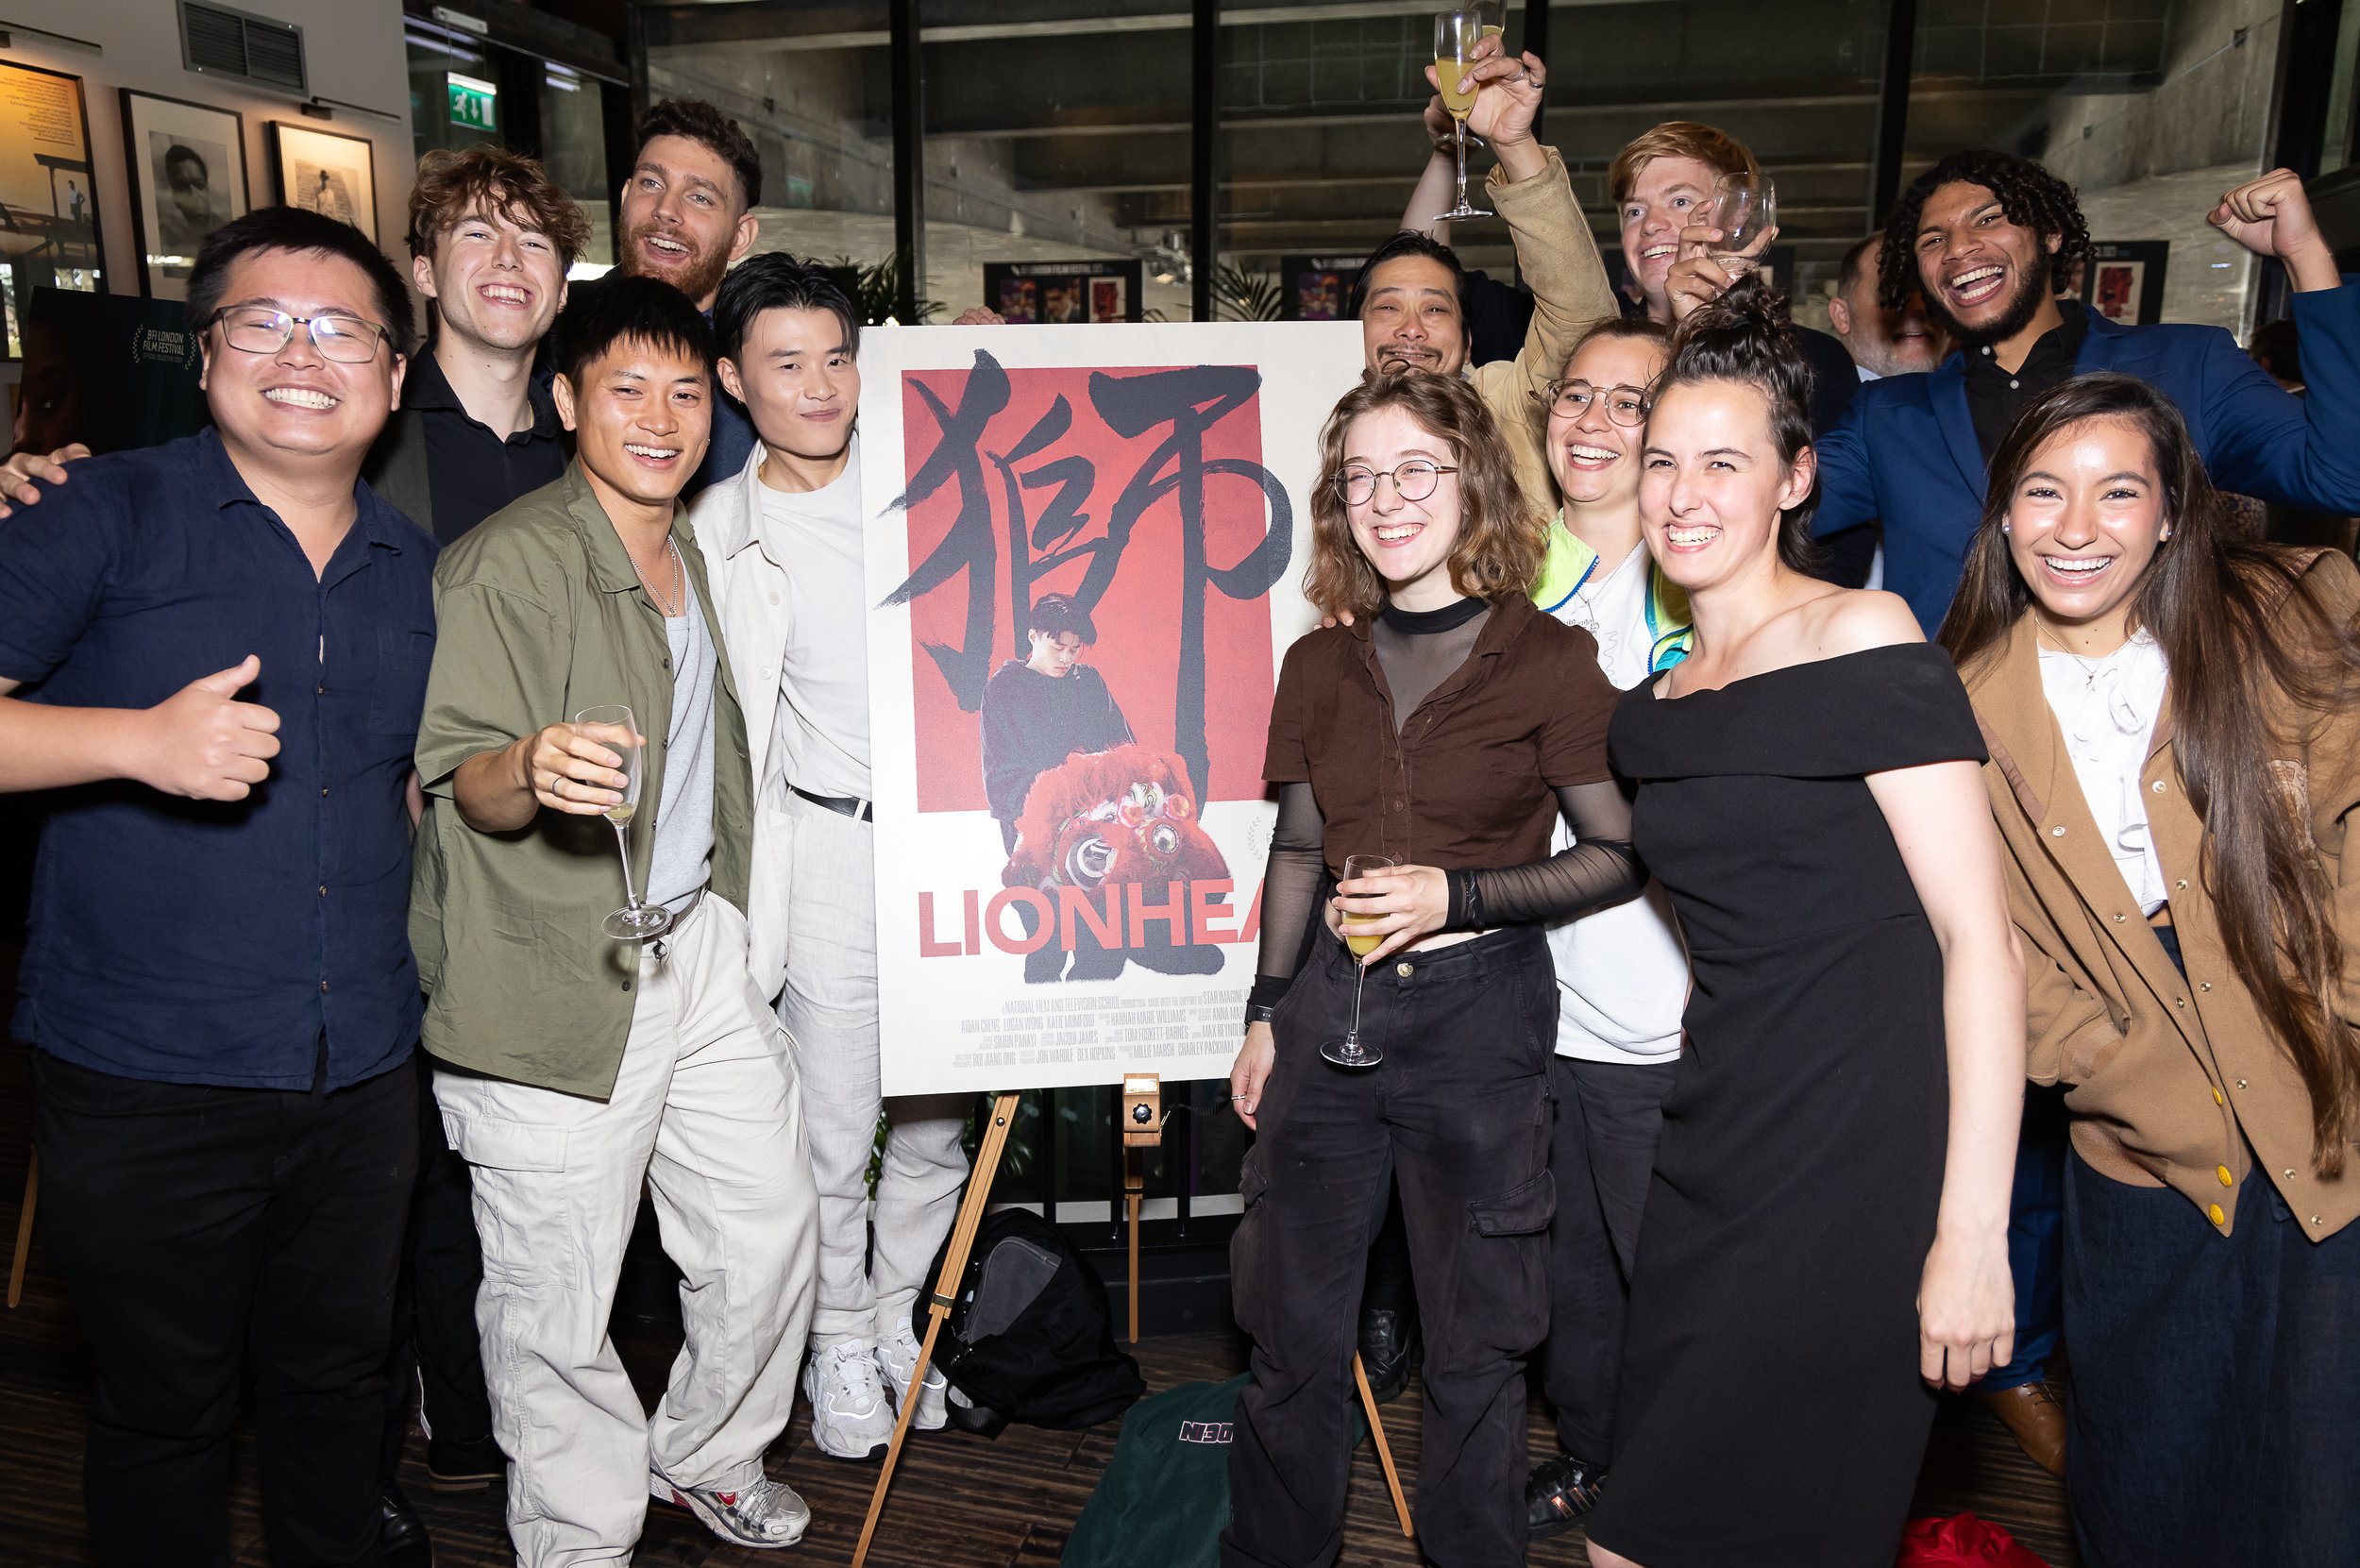 Some of the Cast &amp; Crew of Lionhead at LFF Reception